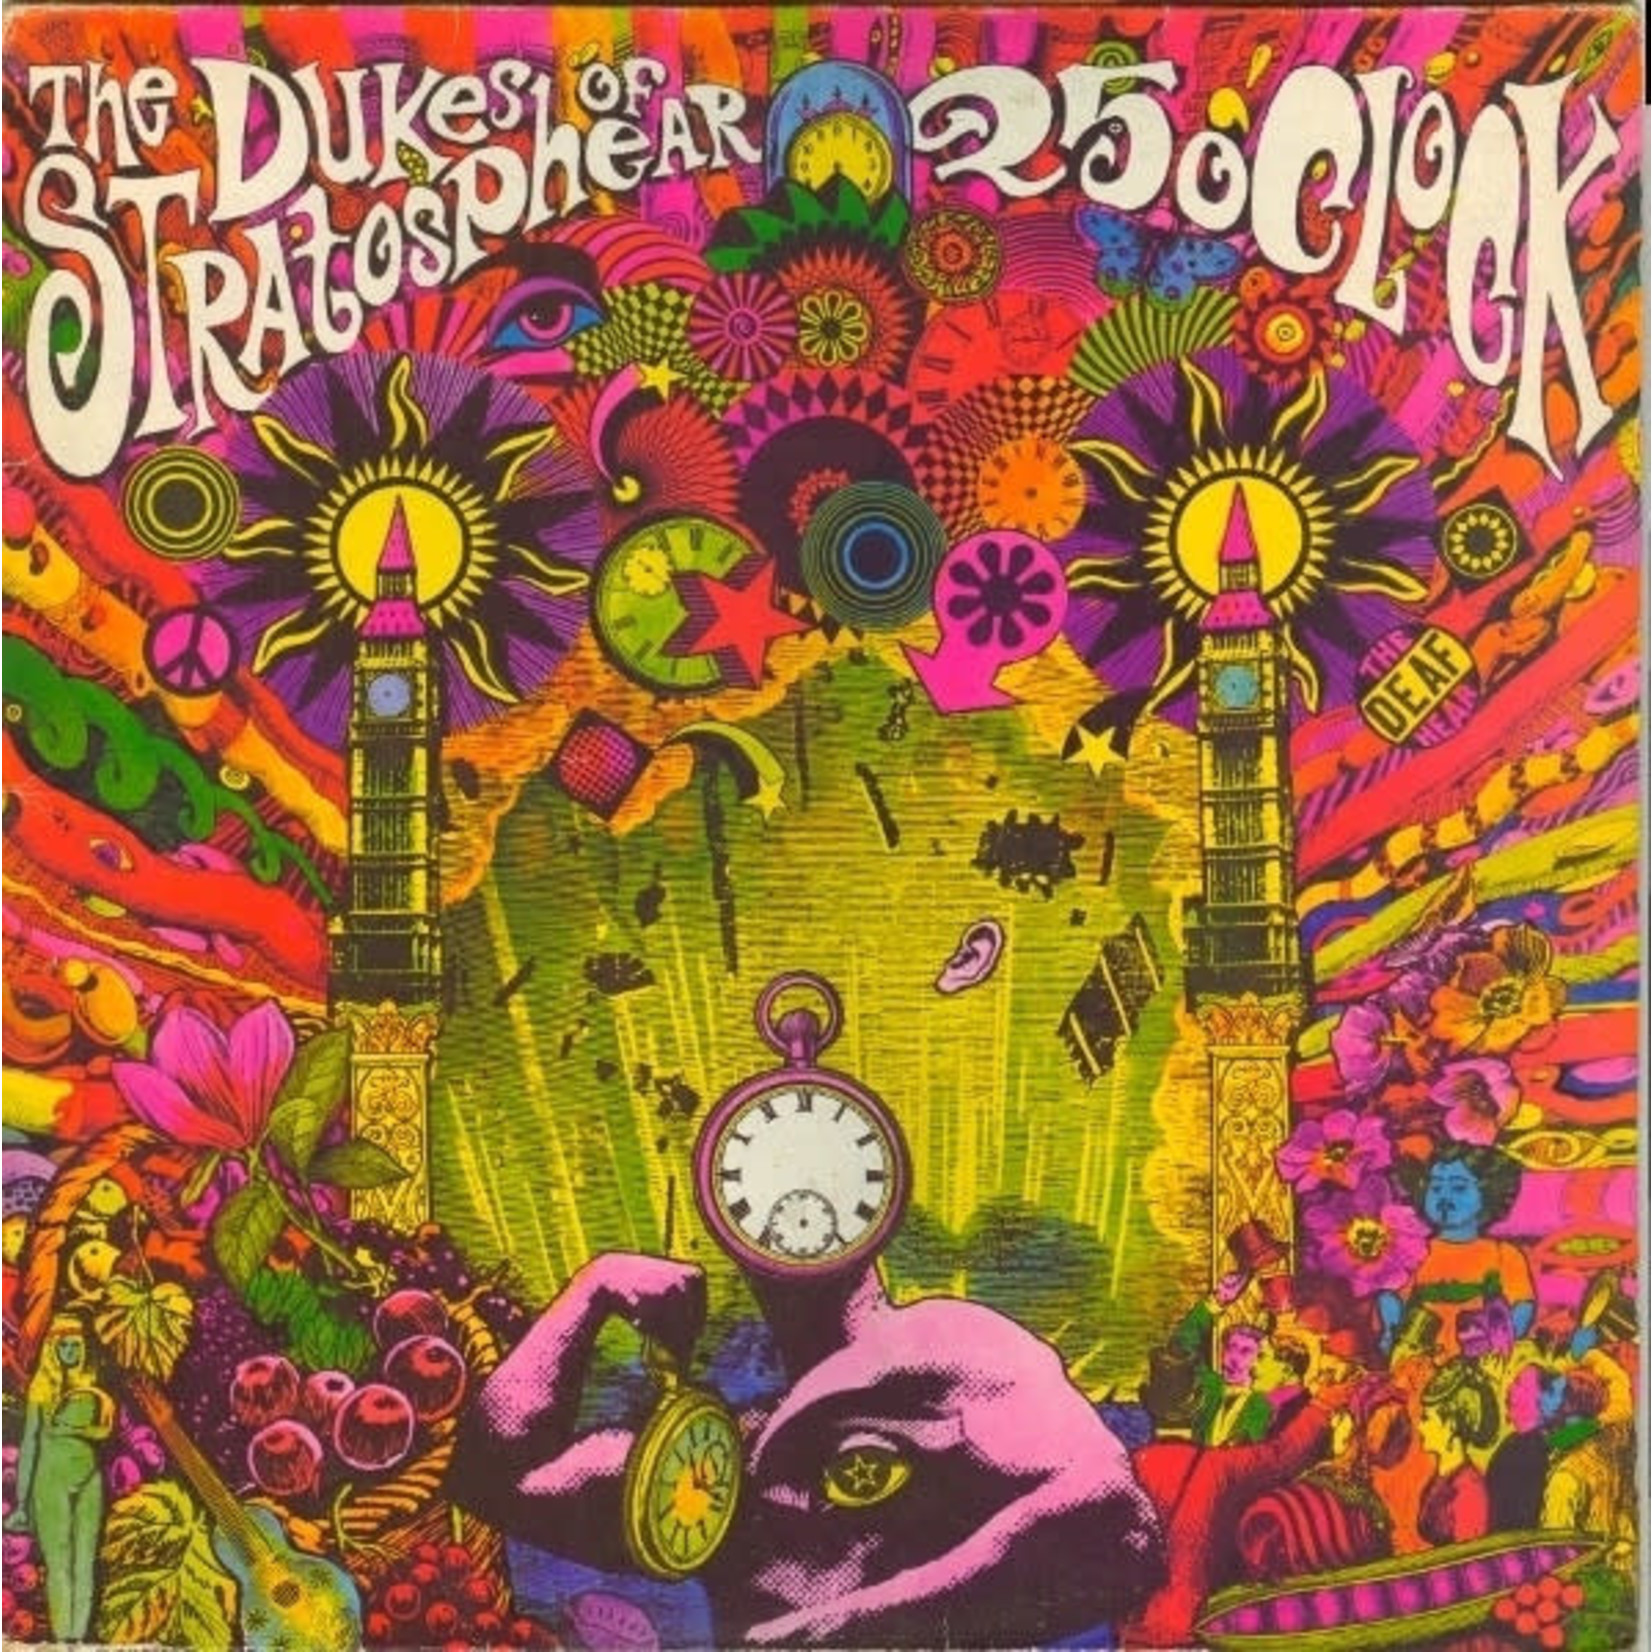 [New] XTC as the Dukes Of Stratosphear - 25 O'Clock (200g)